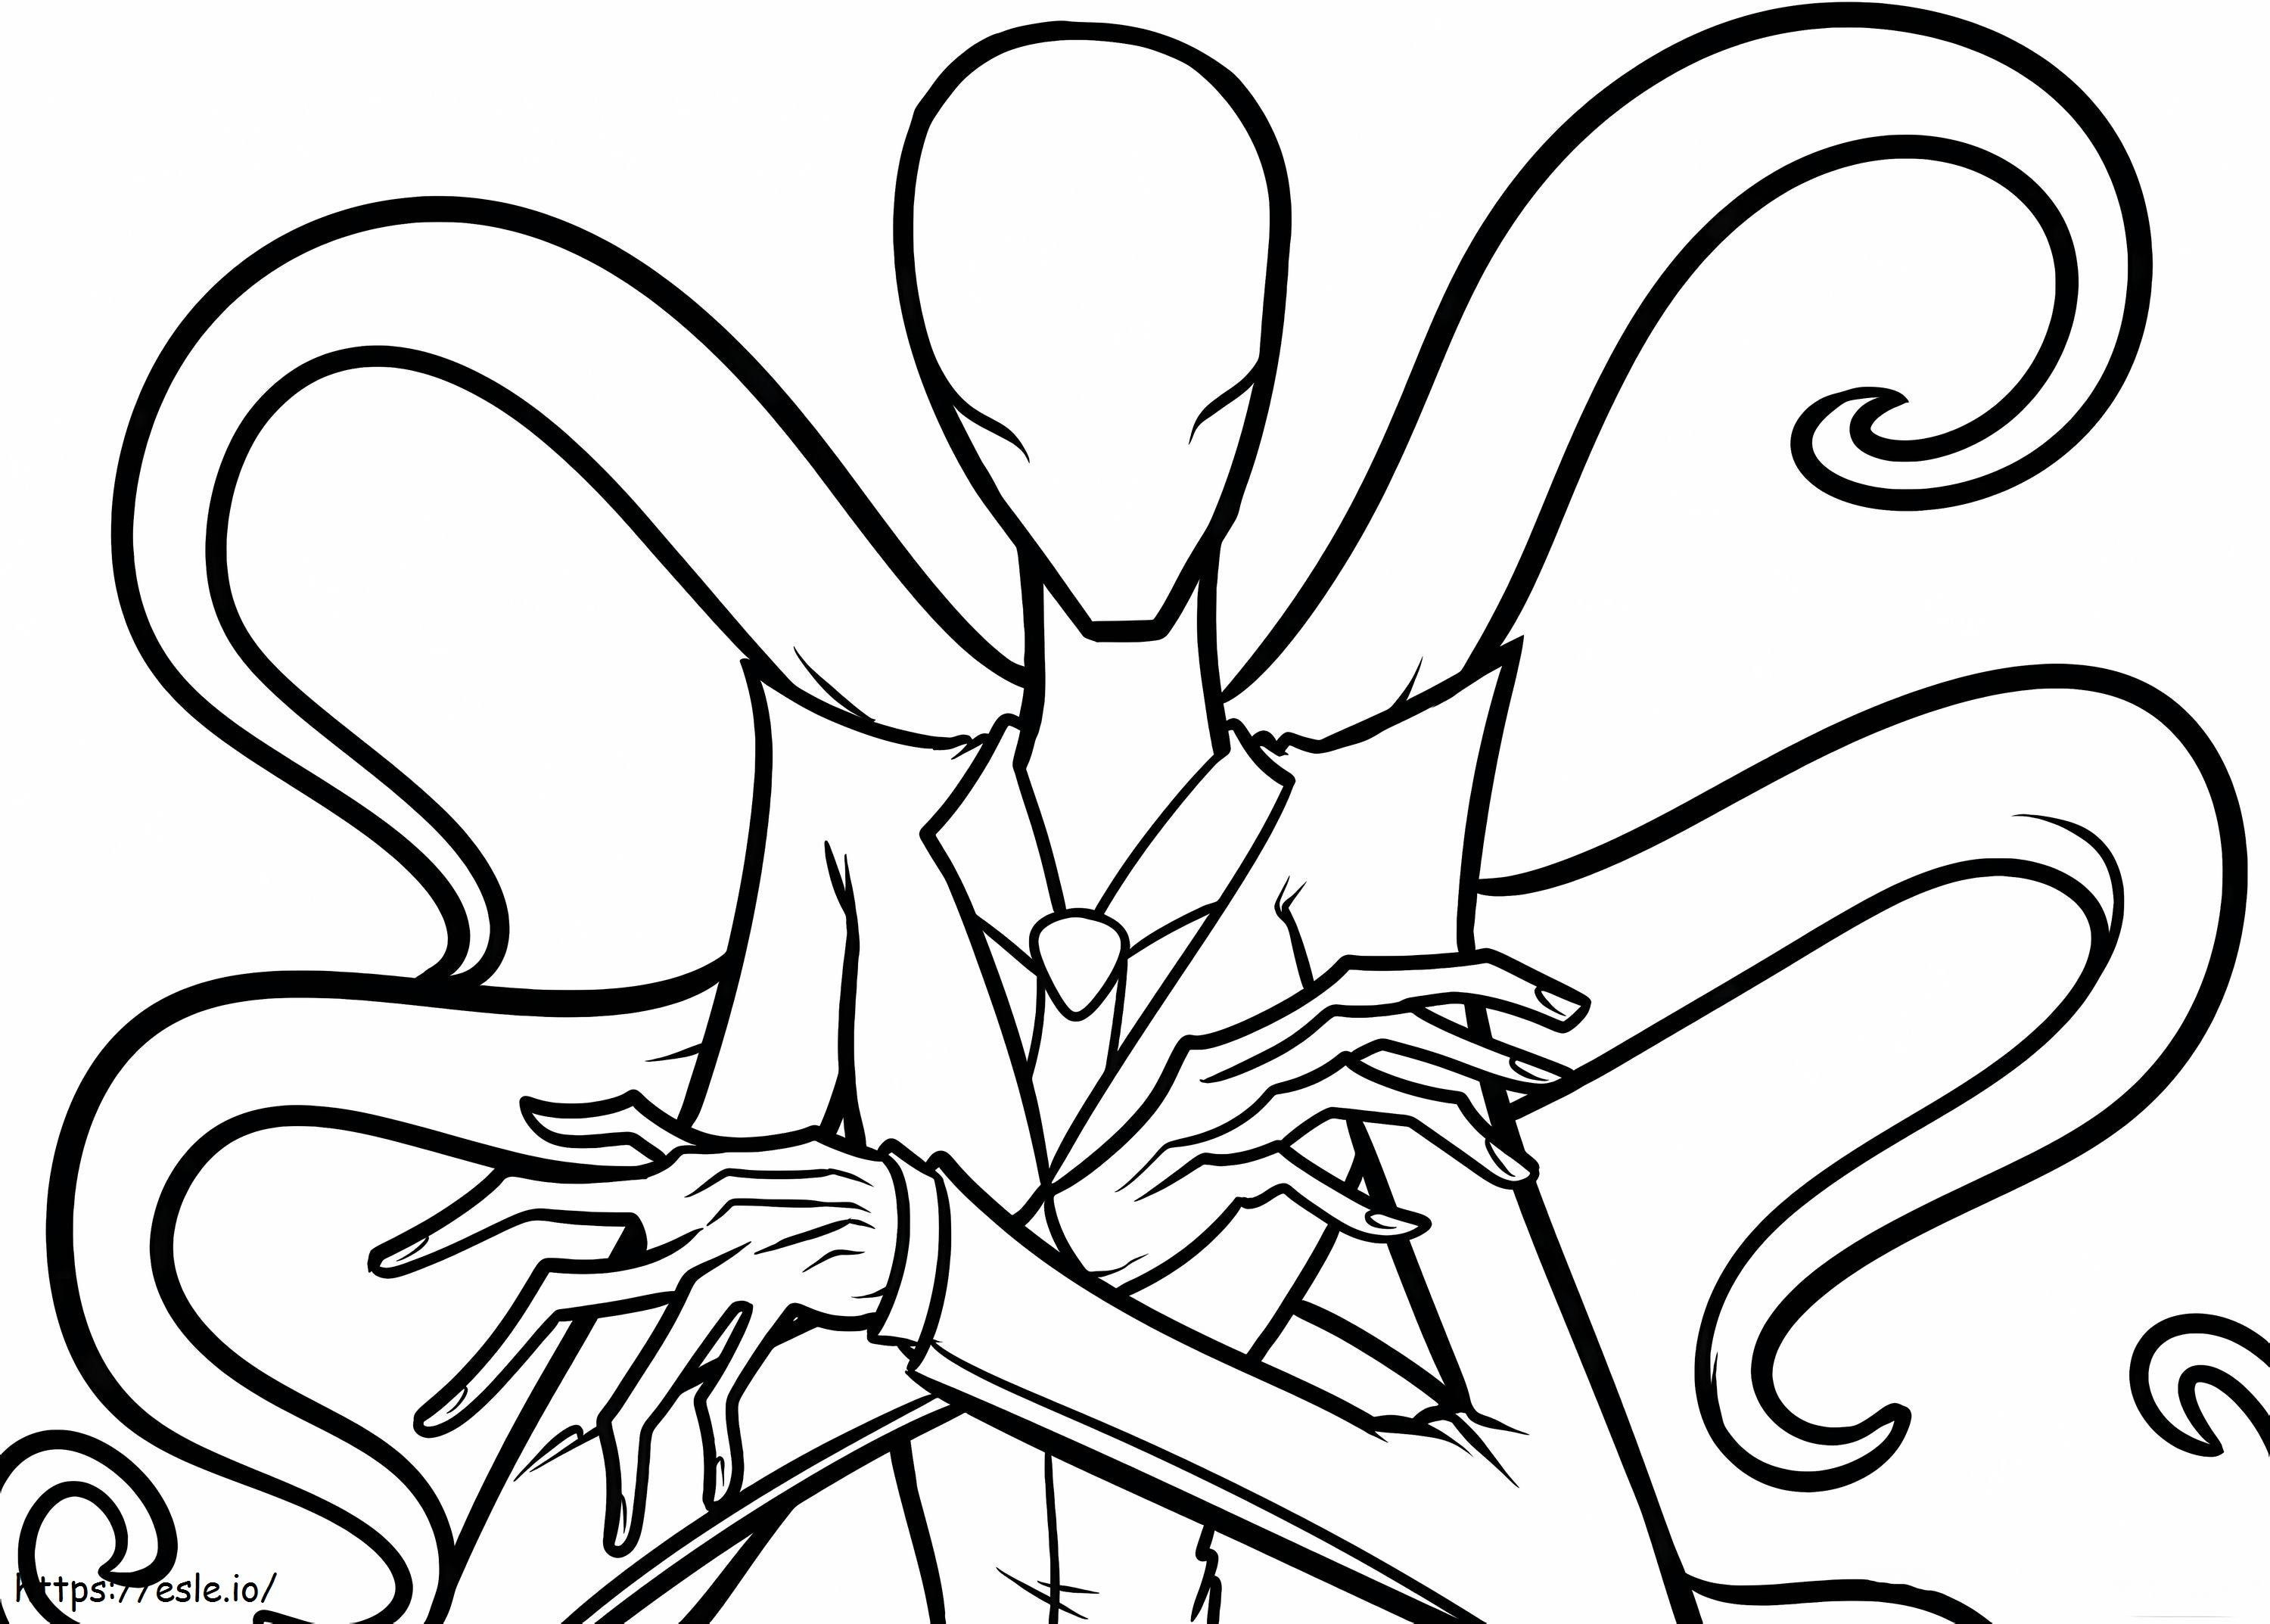 1545009227 Deec24817A4Ed3354734Ed37Aae2F7Ab coloring page